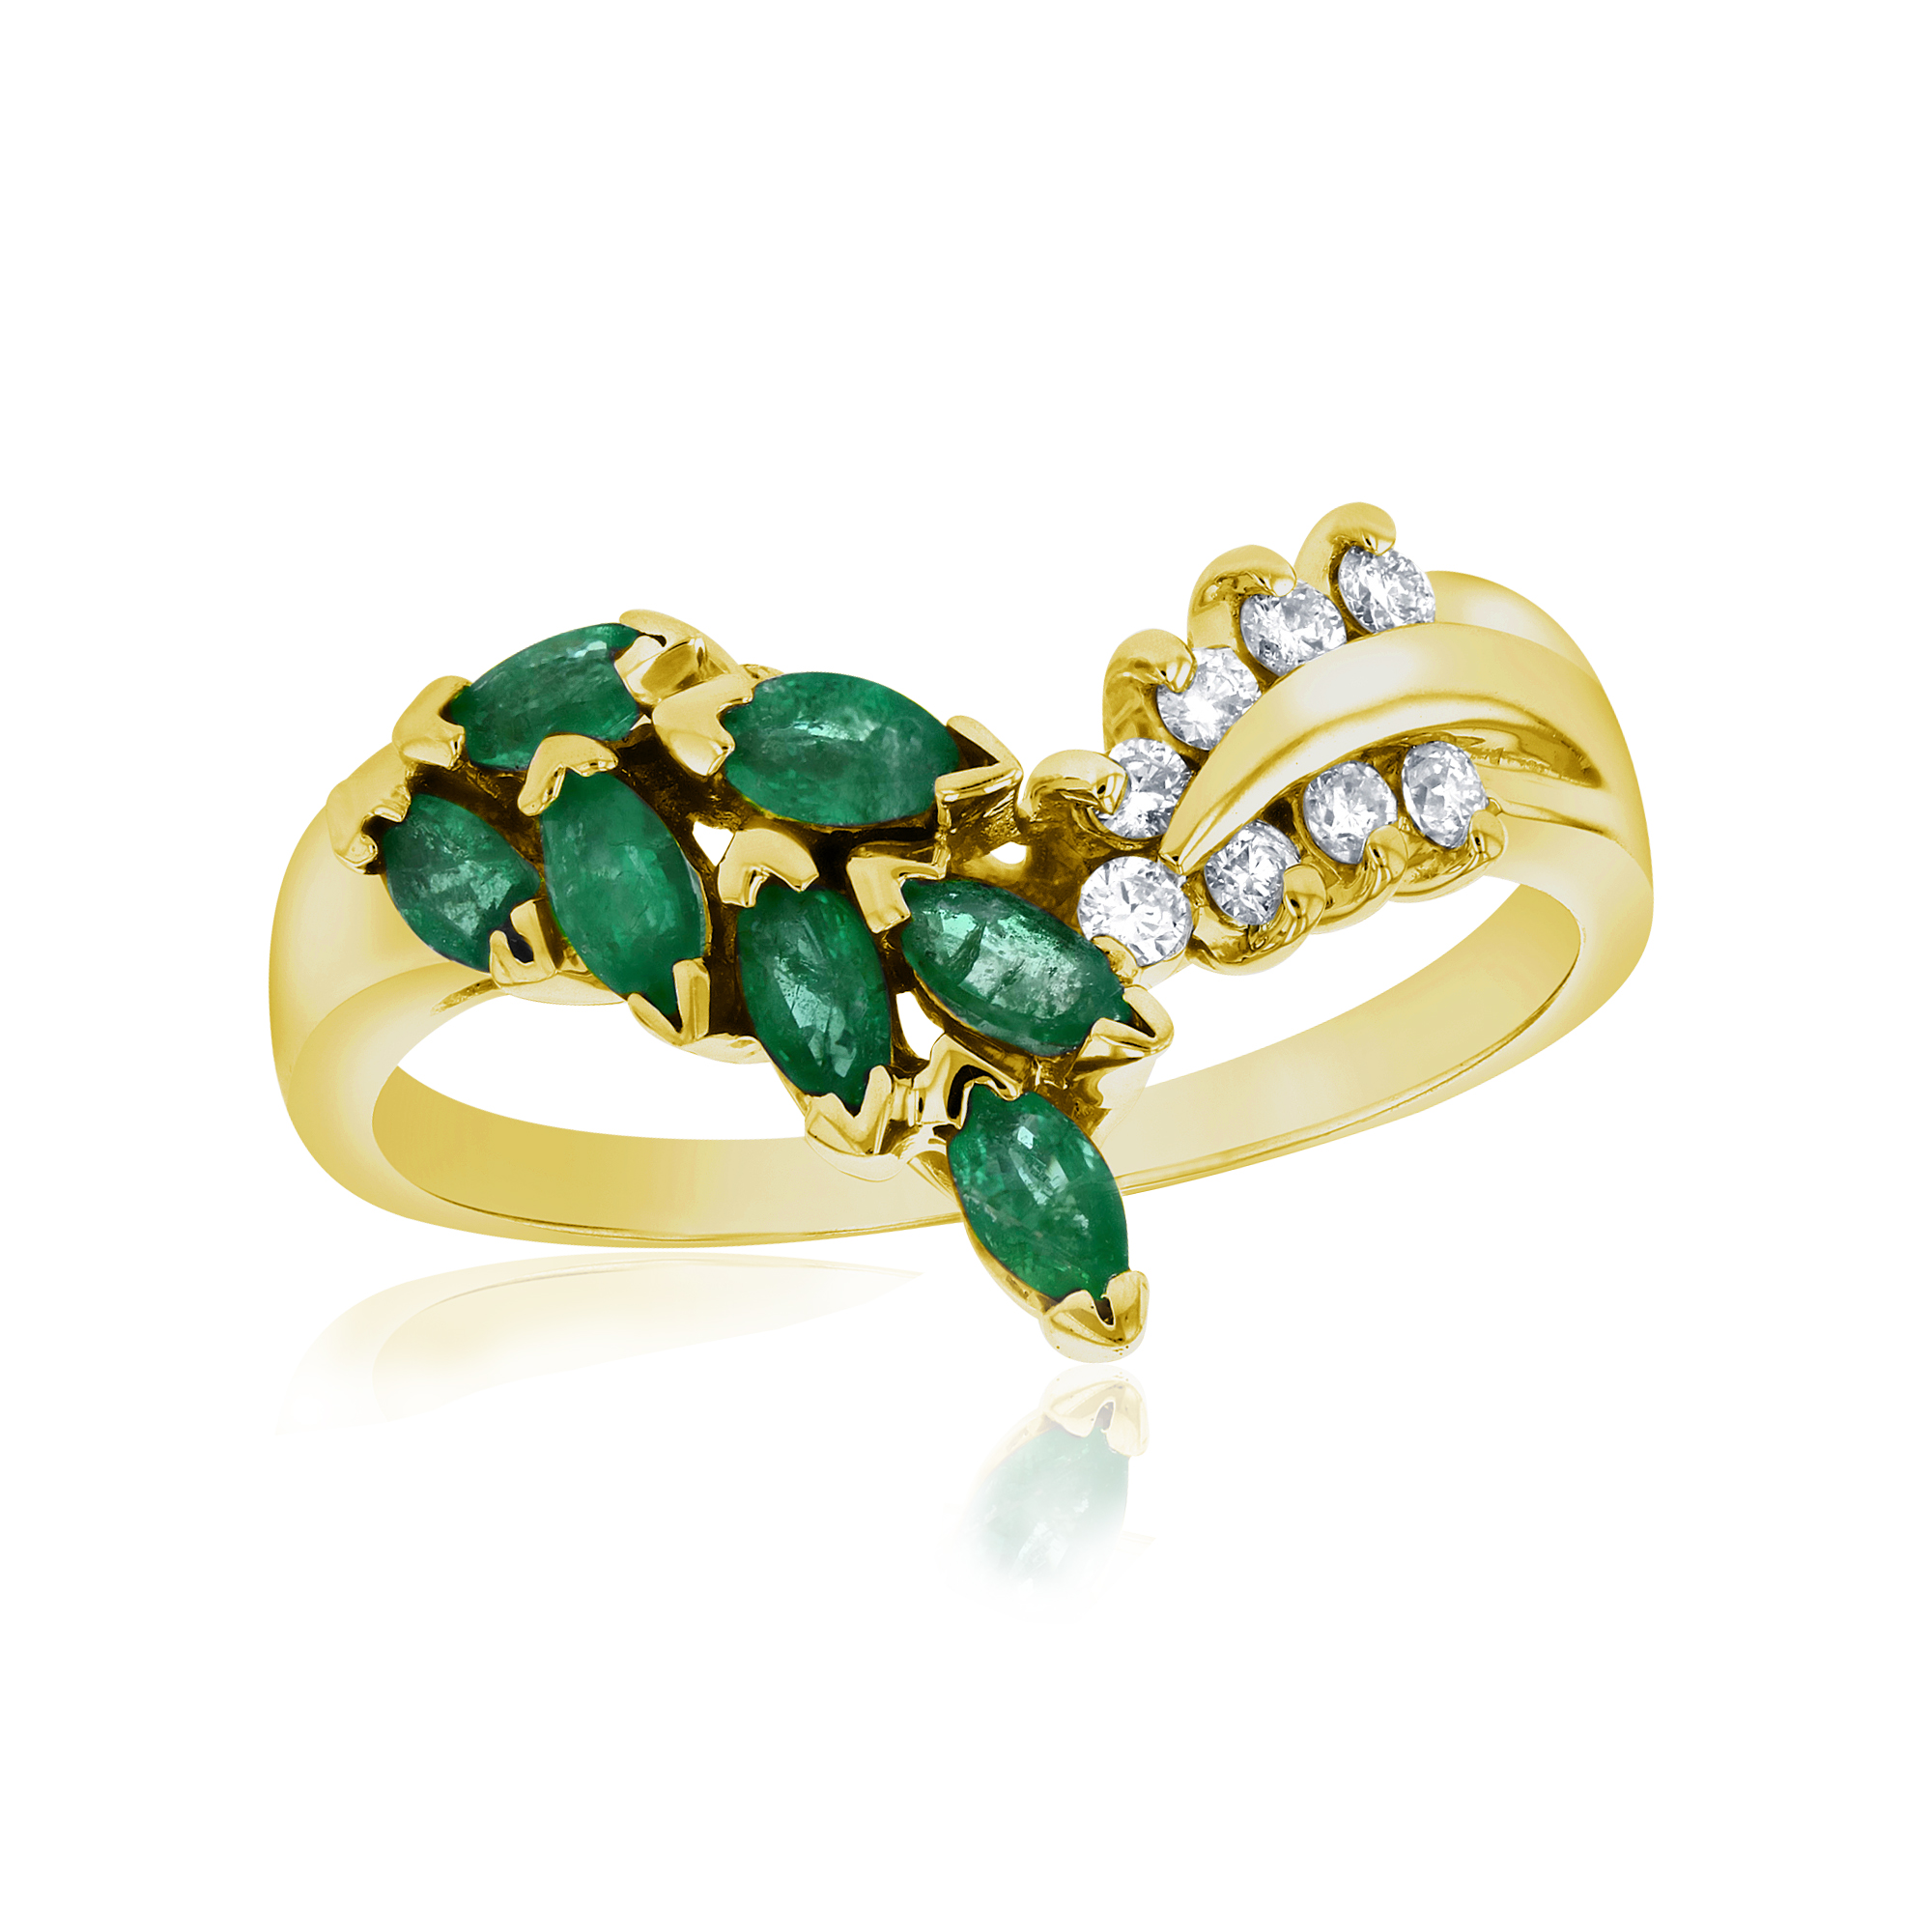 View 0.10ctw Diamonds and Emerald Fashion Ring in 14k Yellow Gold